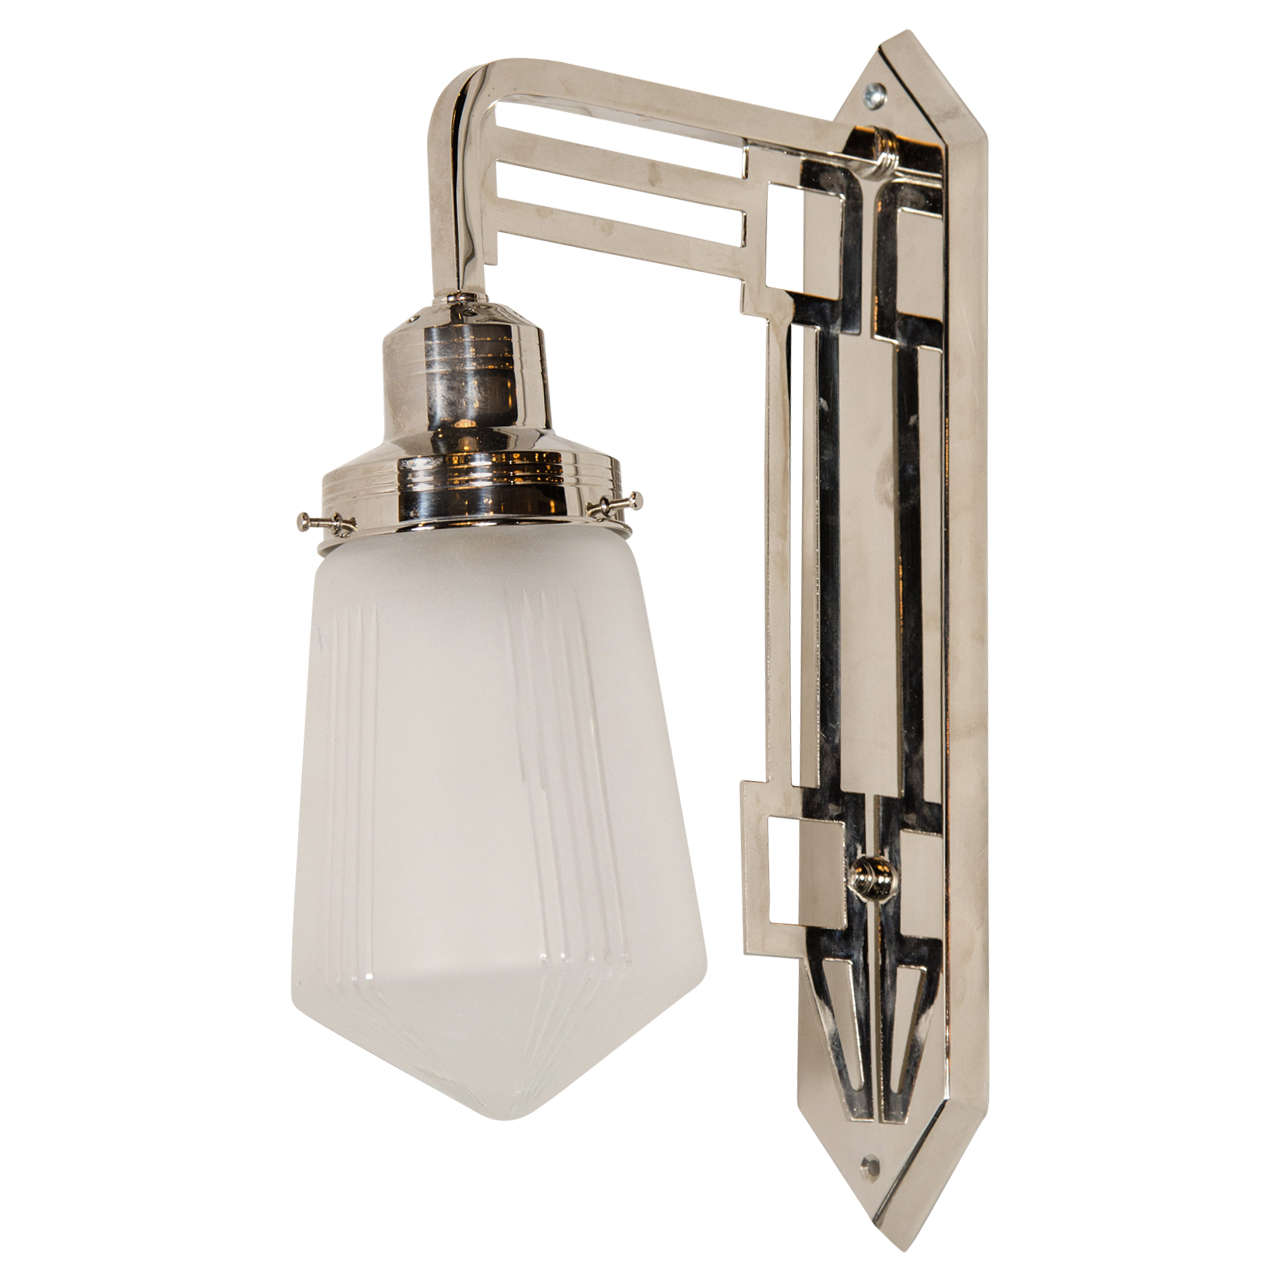 Art Deco Bauhaus Style Sconce in the manner of Josef Hoffman in Polished Nickel